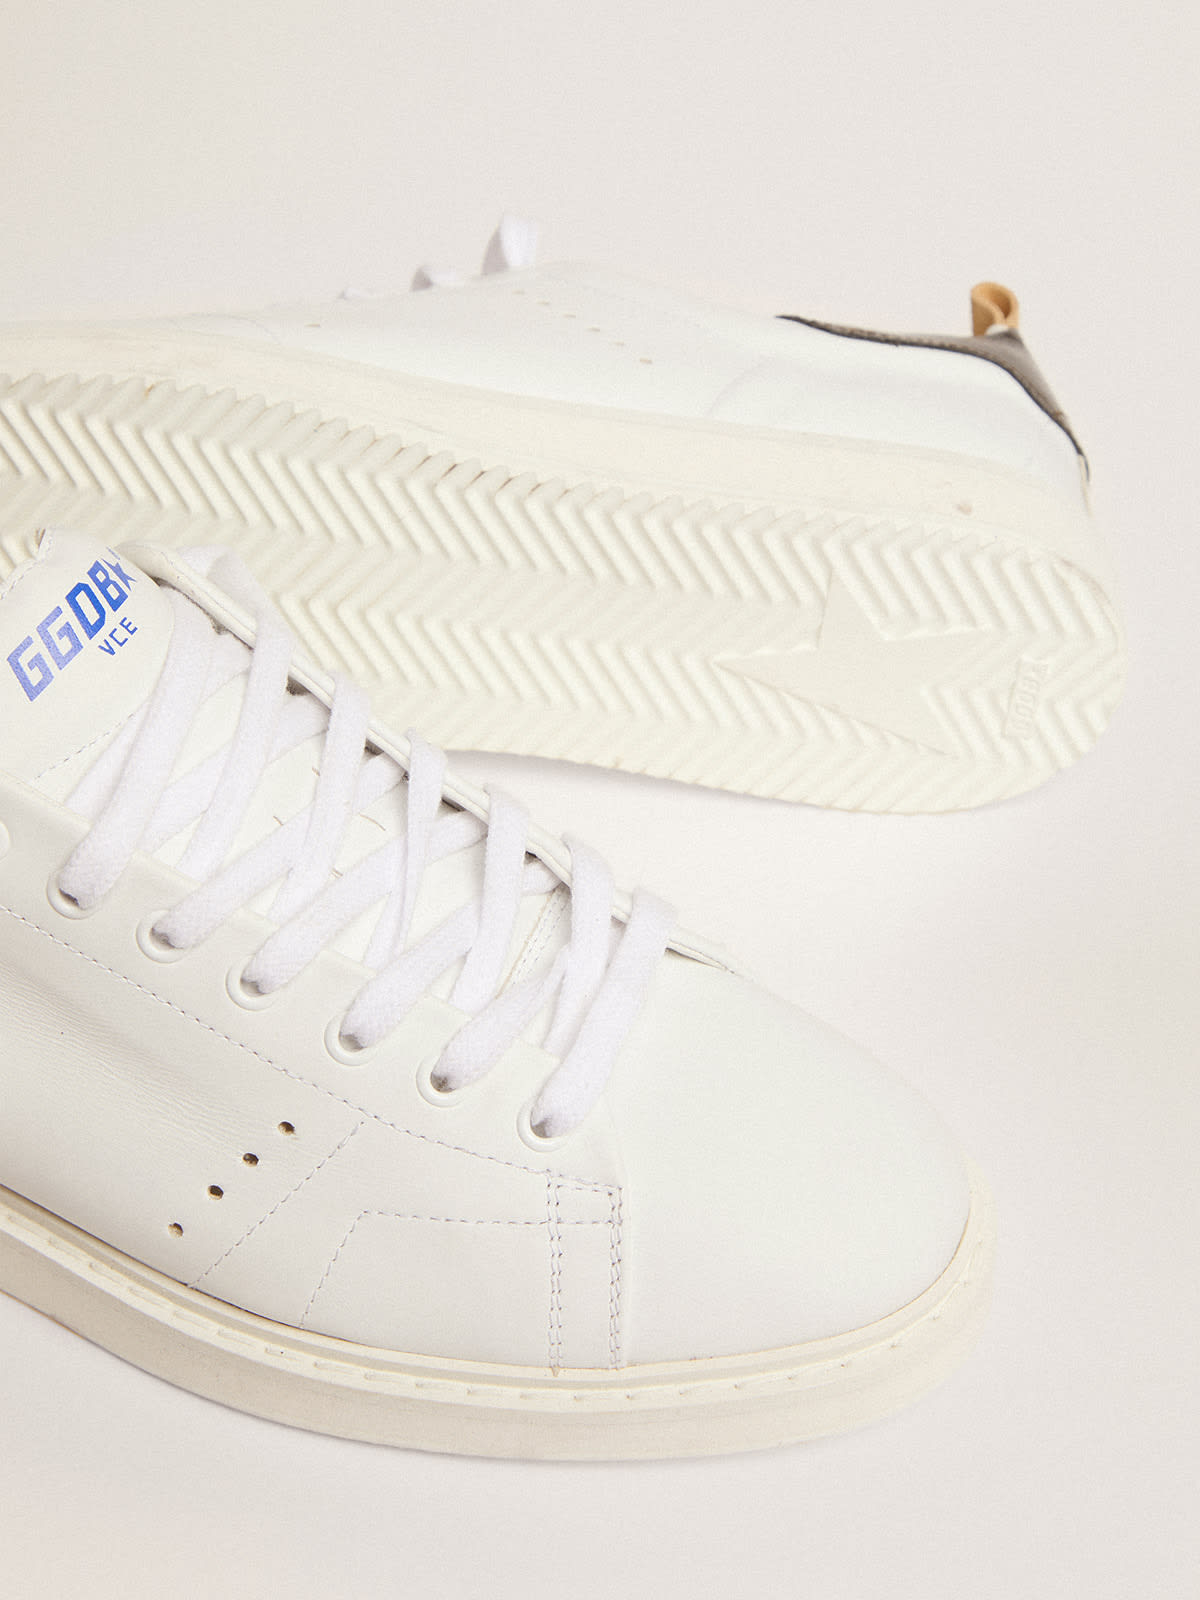 Golden Goose - Starter sneakers in white naplak with gray patent leather heel tab in 